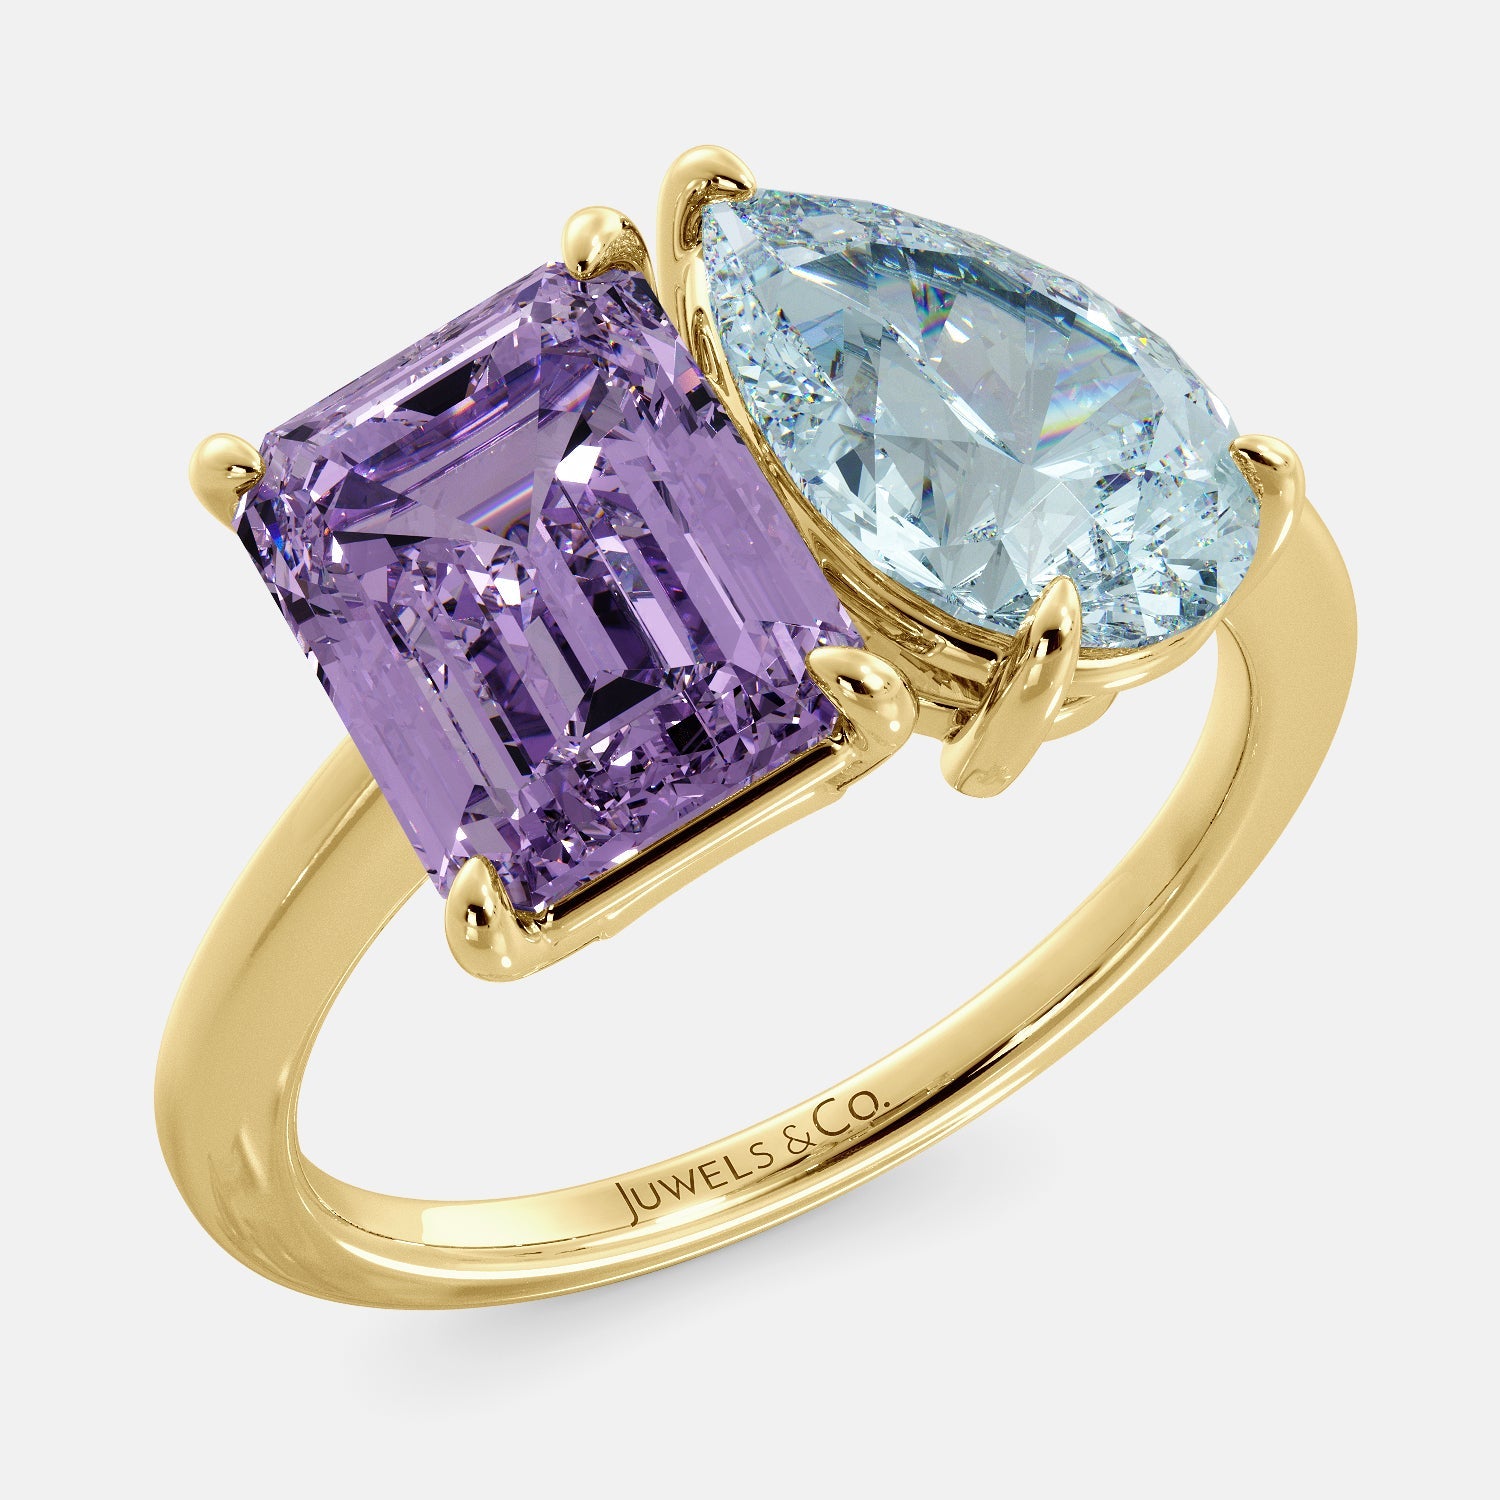 A toi et moi ring with a pear-shaped aquamarine and an emerald-cut amethyst. The ring is set in a 14k yellow gold band and is available in all sizes. The aquamarine is a blue gemstone that is said to promote spiritual growth and strengthen self-confidence. The amethyst is a purple gemstone that is said to promote peace, love, and harmony. The toi et moi ring is a beautiful and unique way to show your love and commitment to someone special.